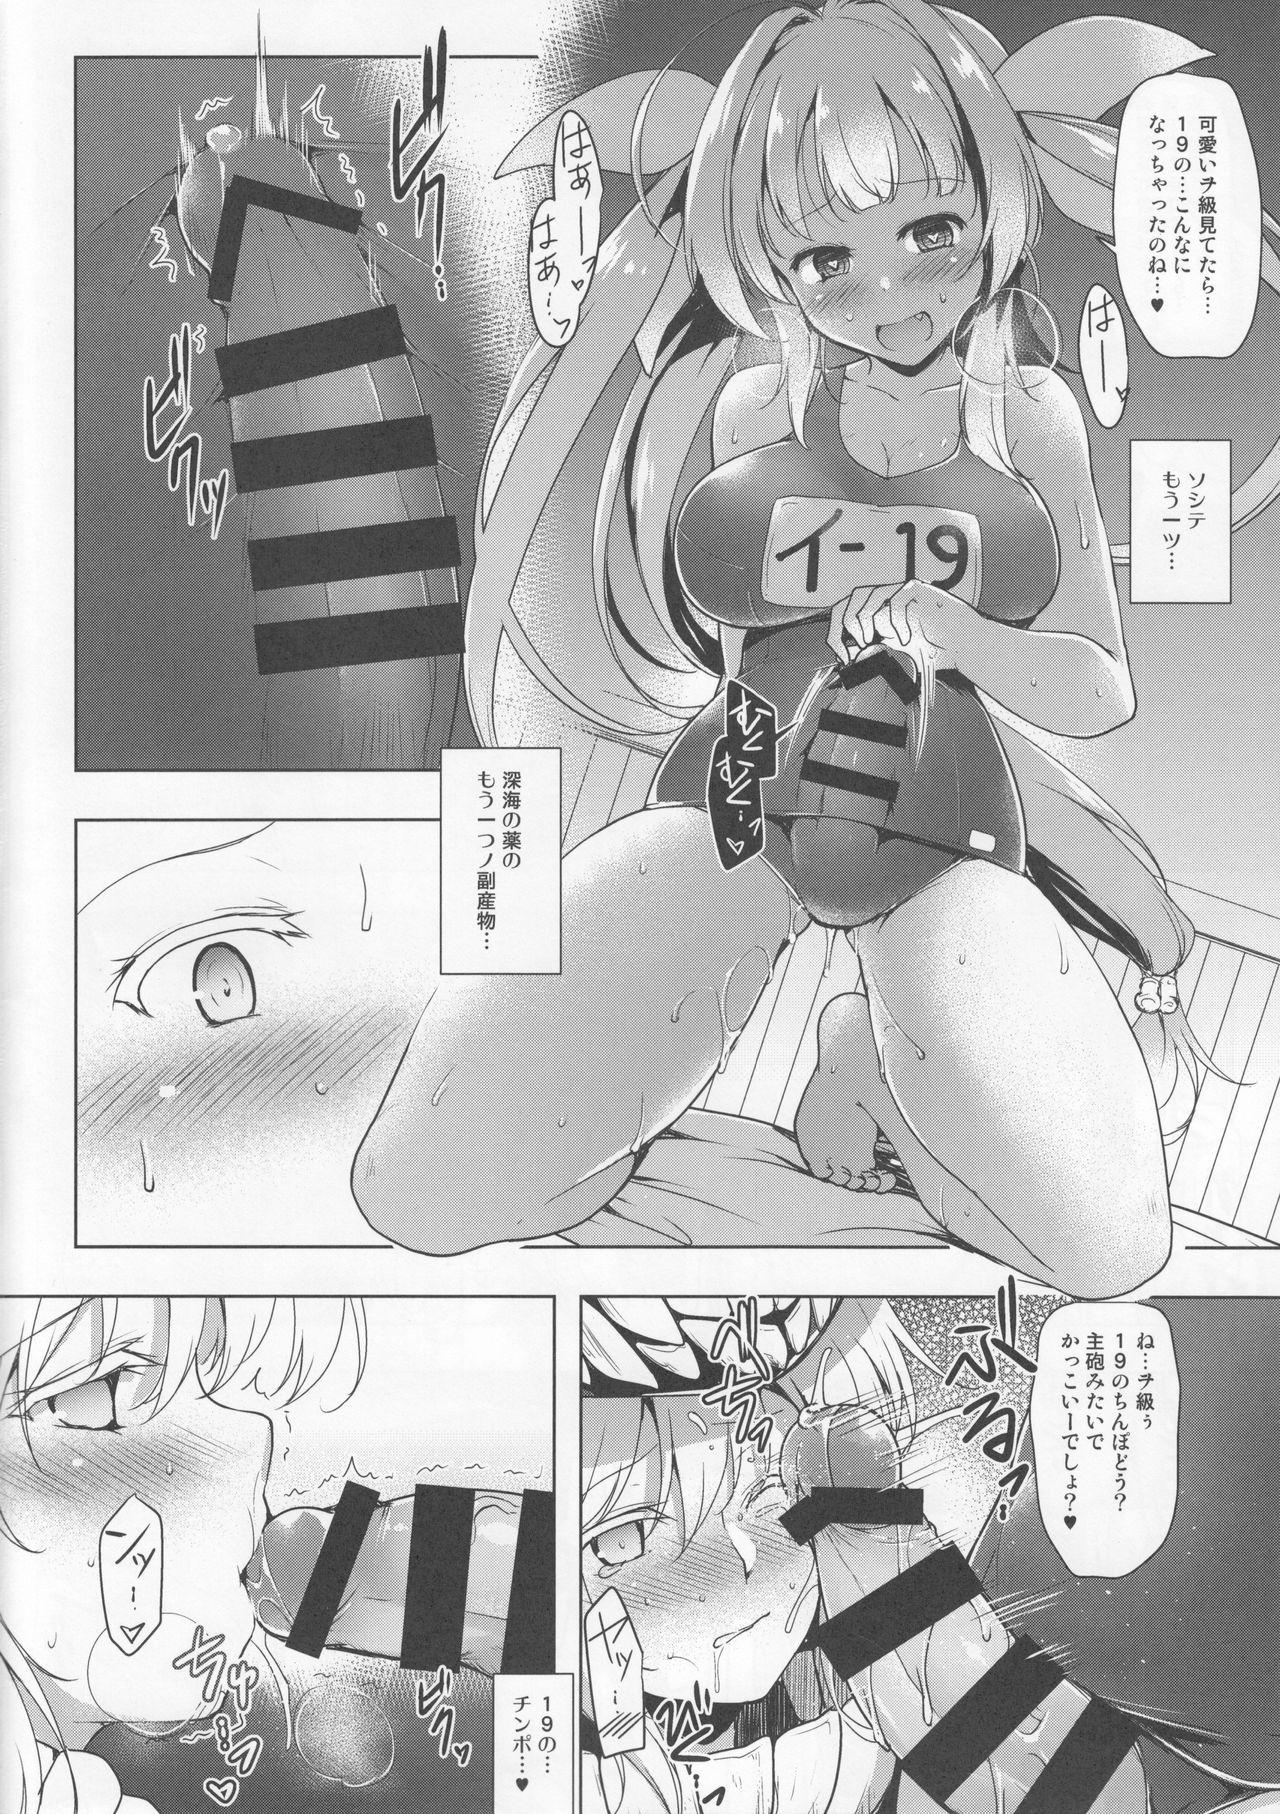 Blackdick Kankourei 10 - Kantai collection Special Locations - Page 9